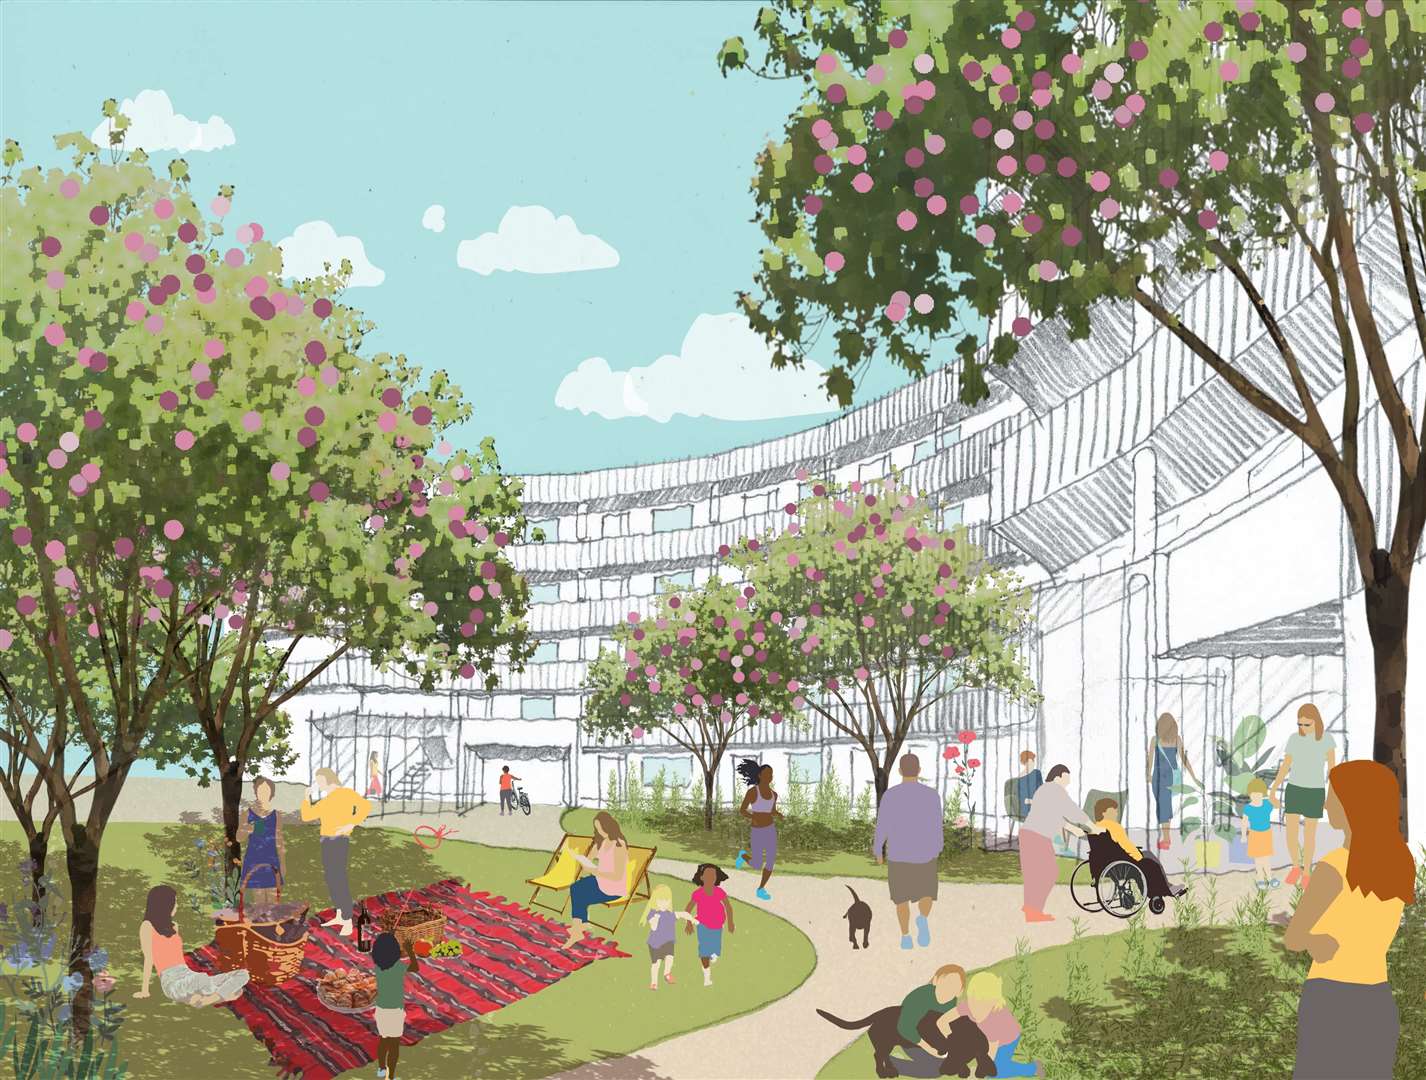 An artist's impression of how the site might look. Photo: Sevenoaks council